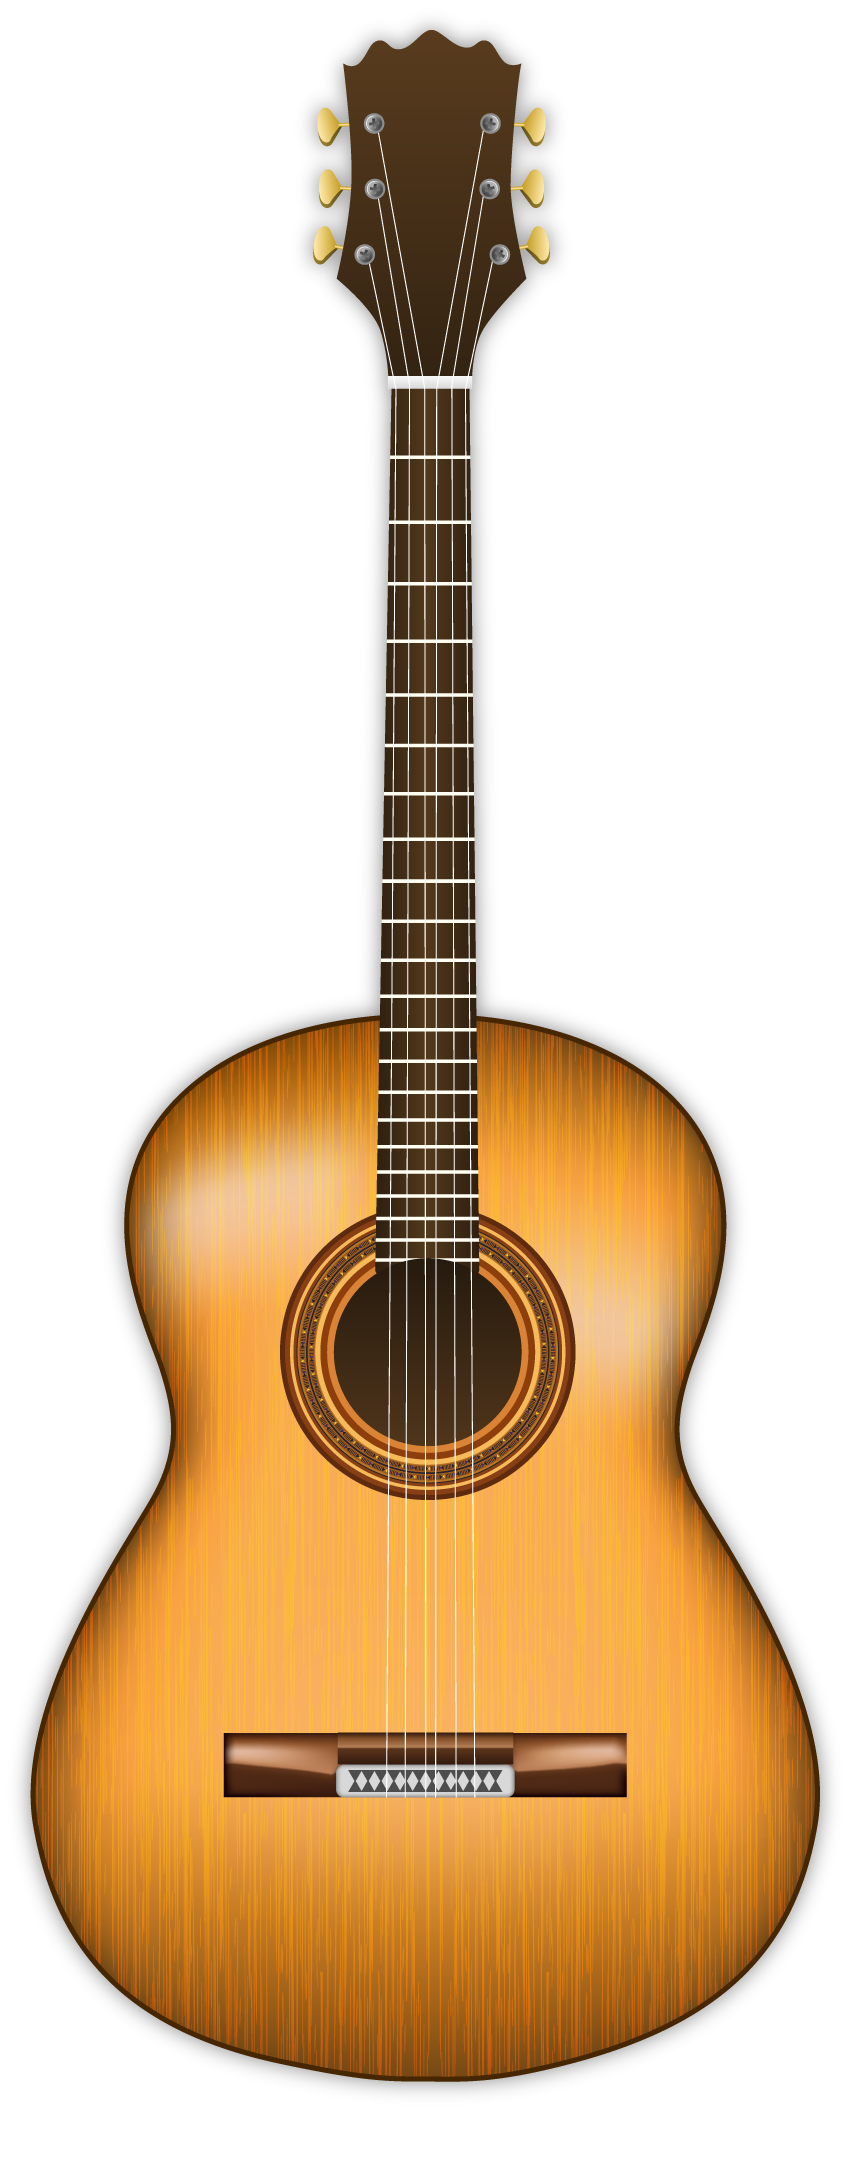 Guitar Acoustic Classical Free Download Image PNG Image